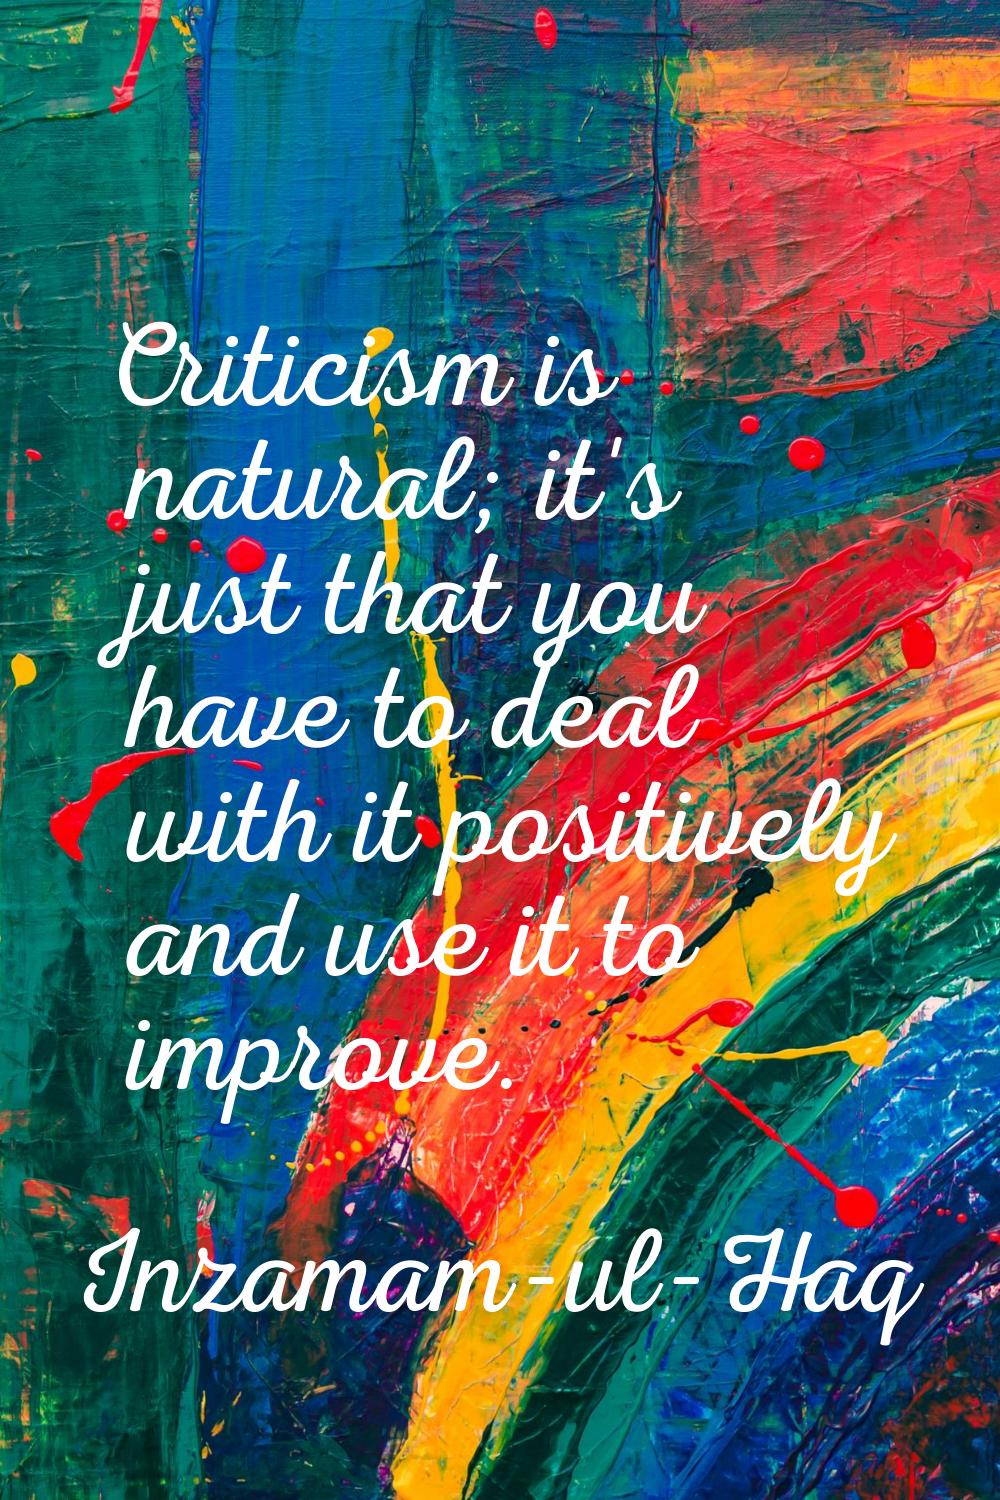 Criticism is natural; it's just that you have to deal with it positively and use it to improve.